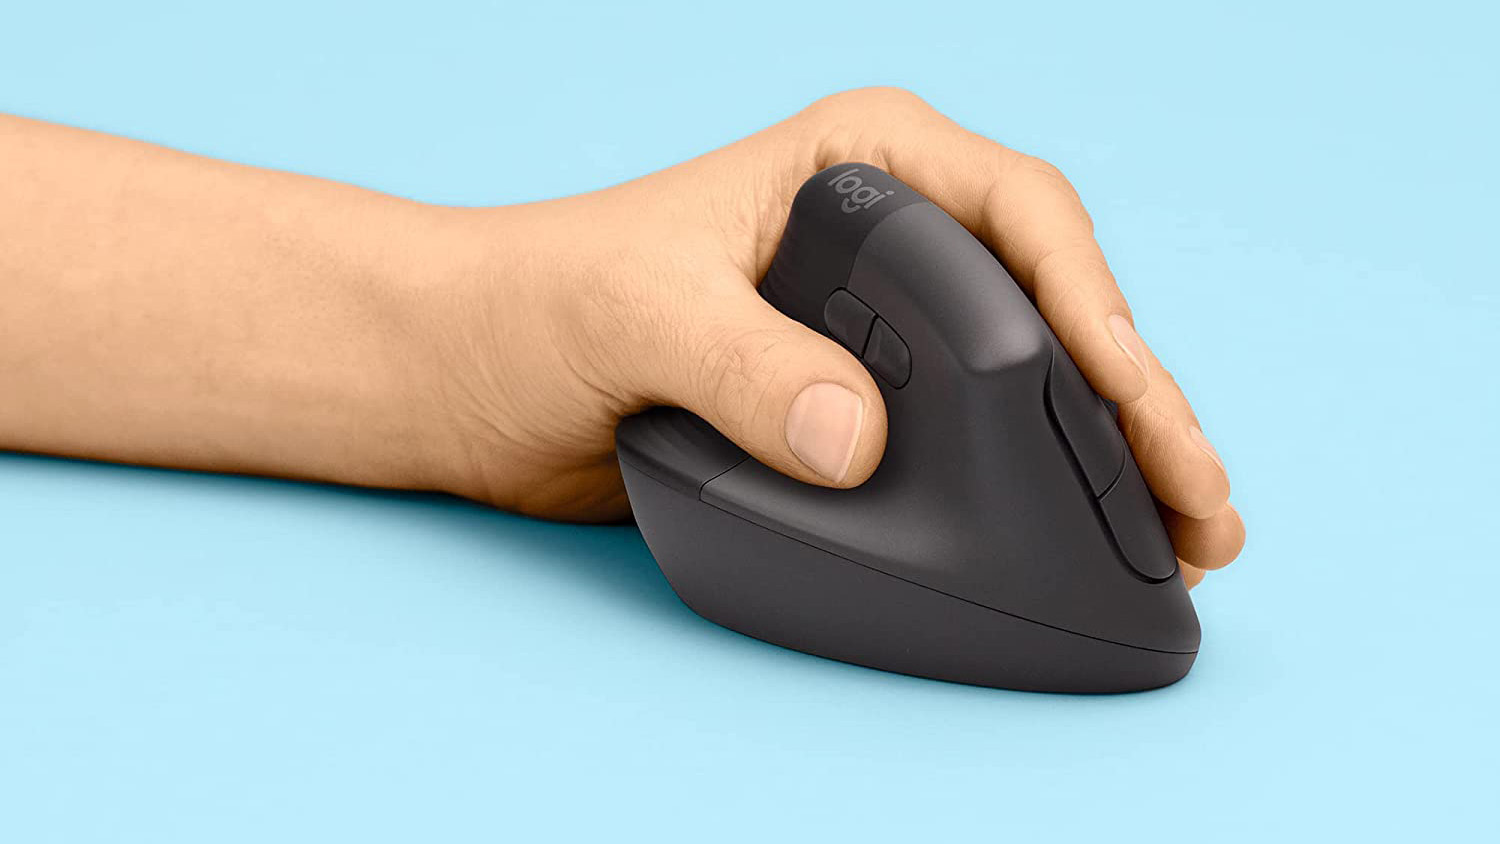 The new Logitech Lift is a cheaper, colorful vertical ergonomic mouse